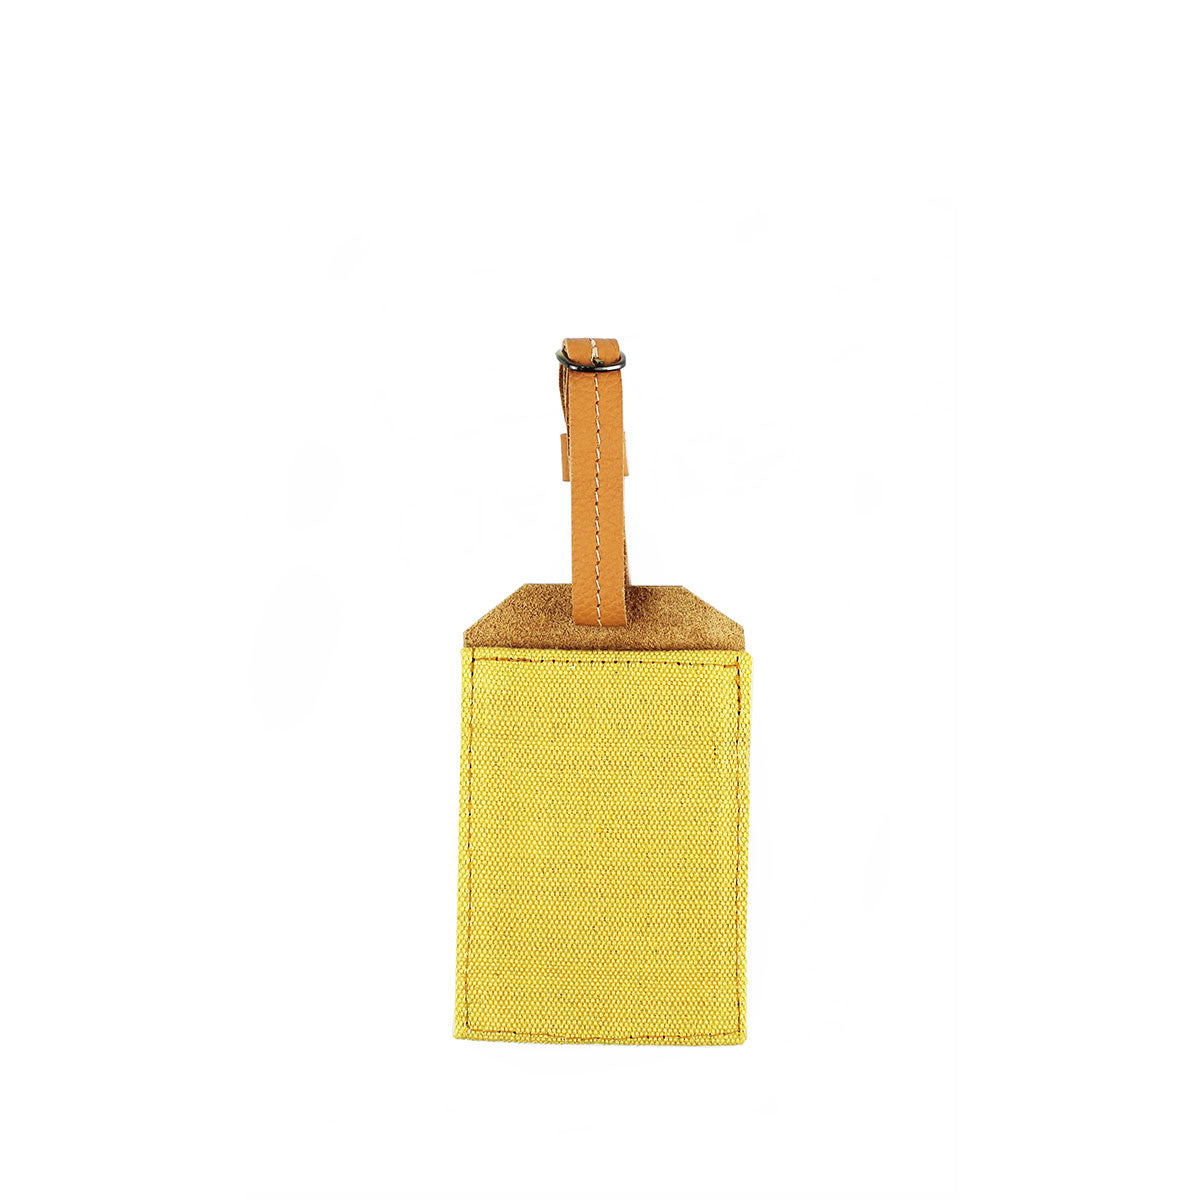 Ines Handwoven Yellow Luggage Tag. The back has a solid woven yellow fabric. It has a leather loop with a mini buckle to adjust for length.